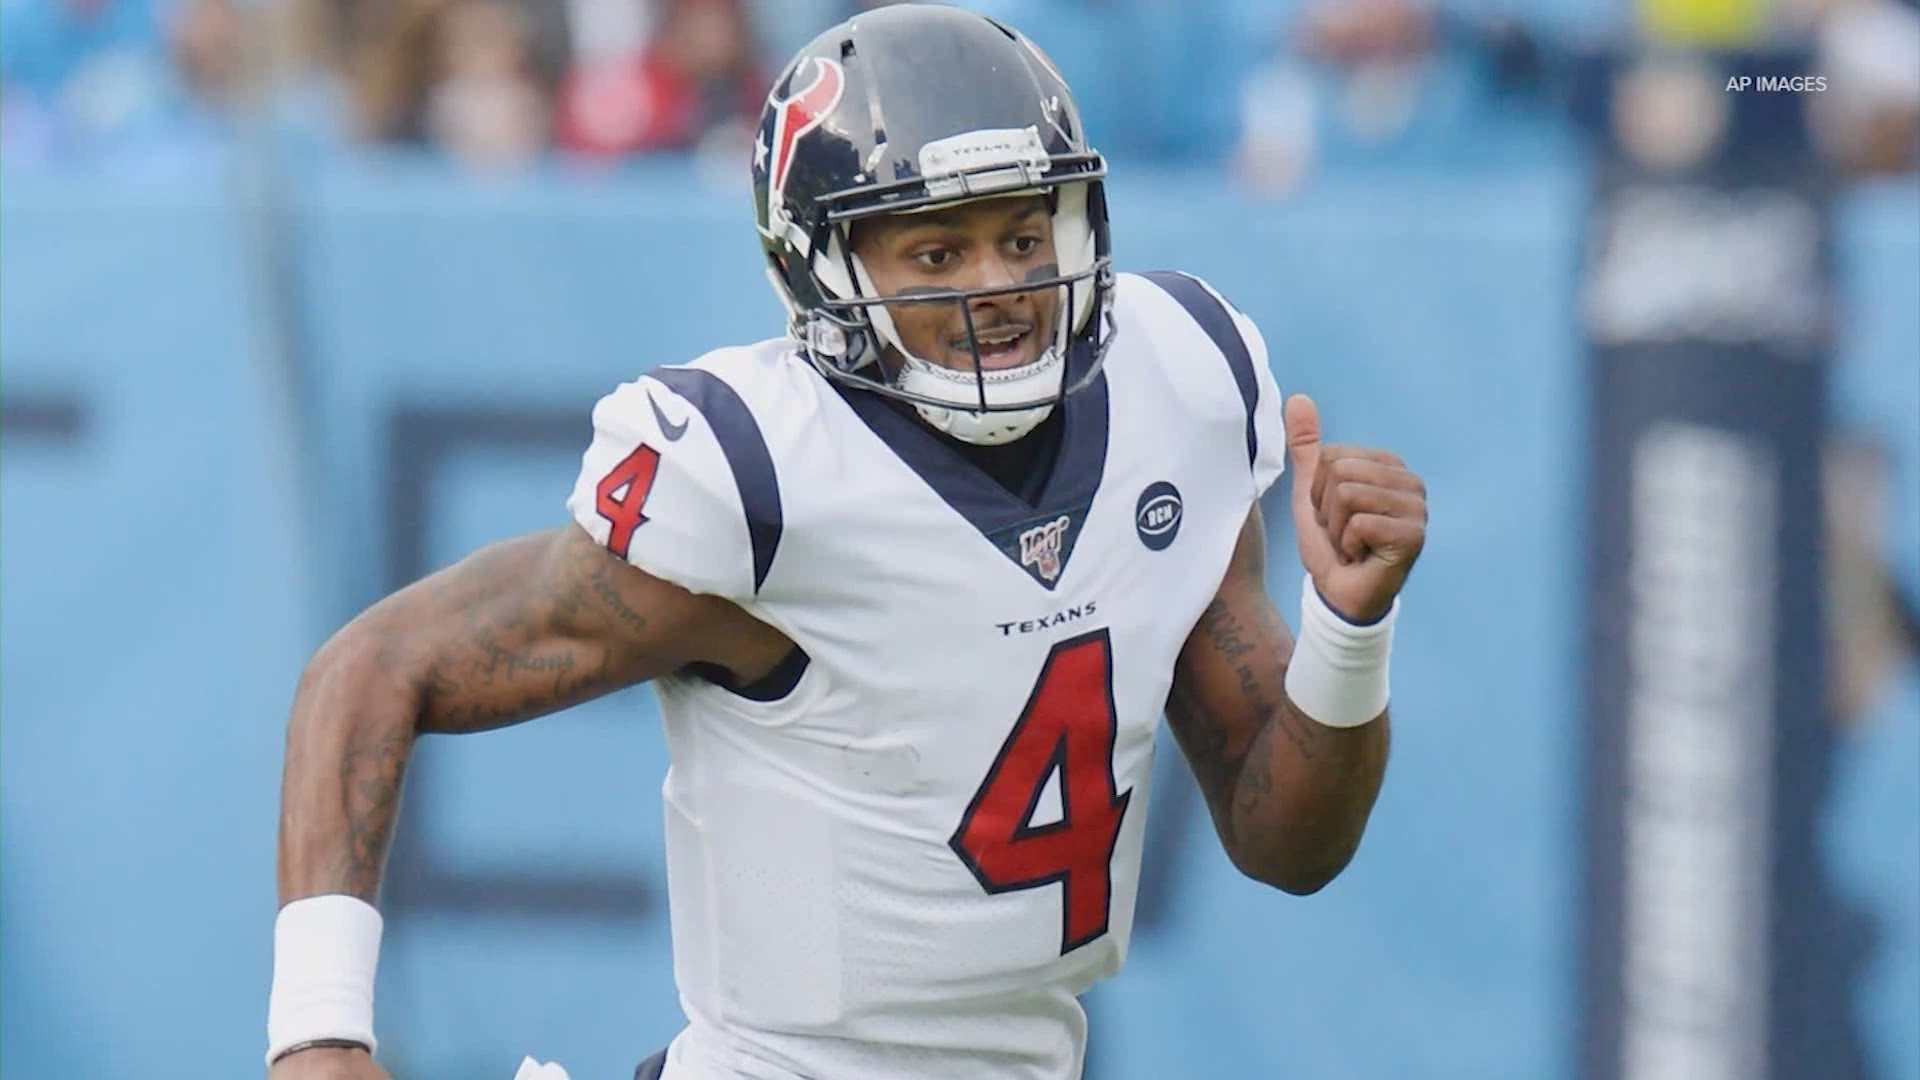 Two civil lawsuits have been filed in Harris County accusing Texans quarterback Deshaun Watson of inappropriately touching women.